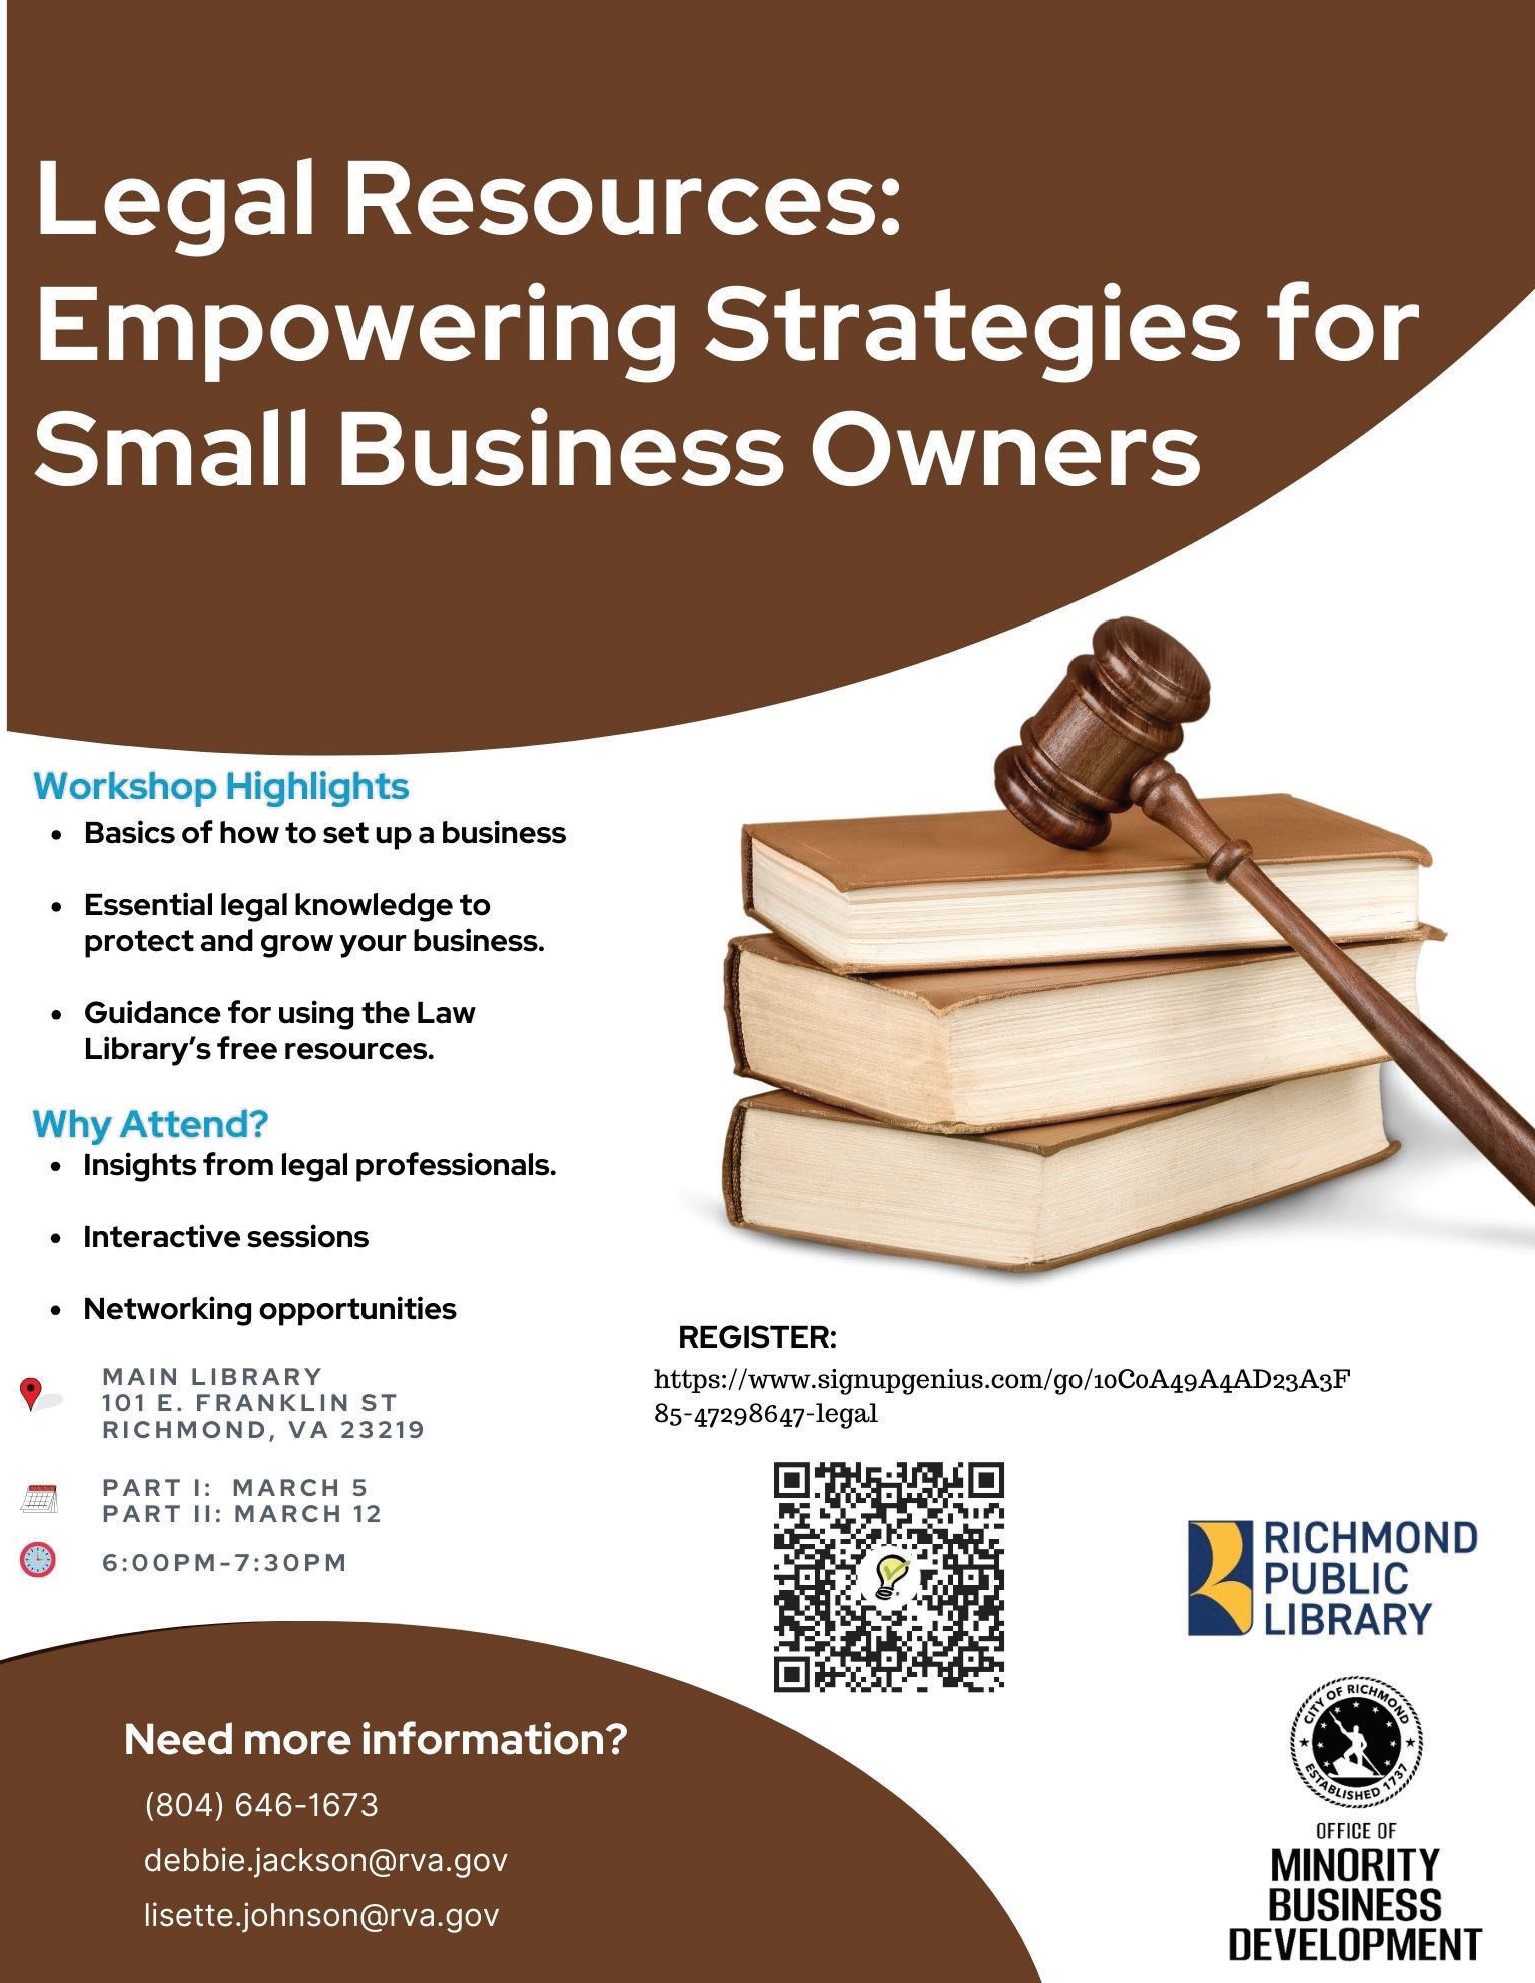 Legal Resources: Empowering Strategies for Small Business Owners